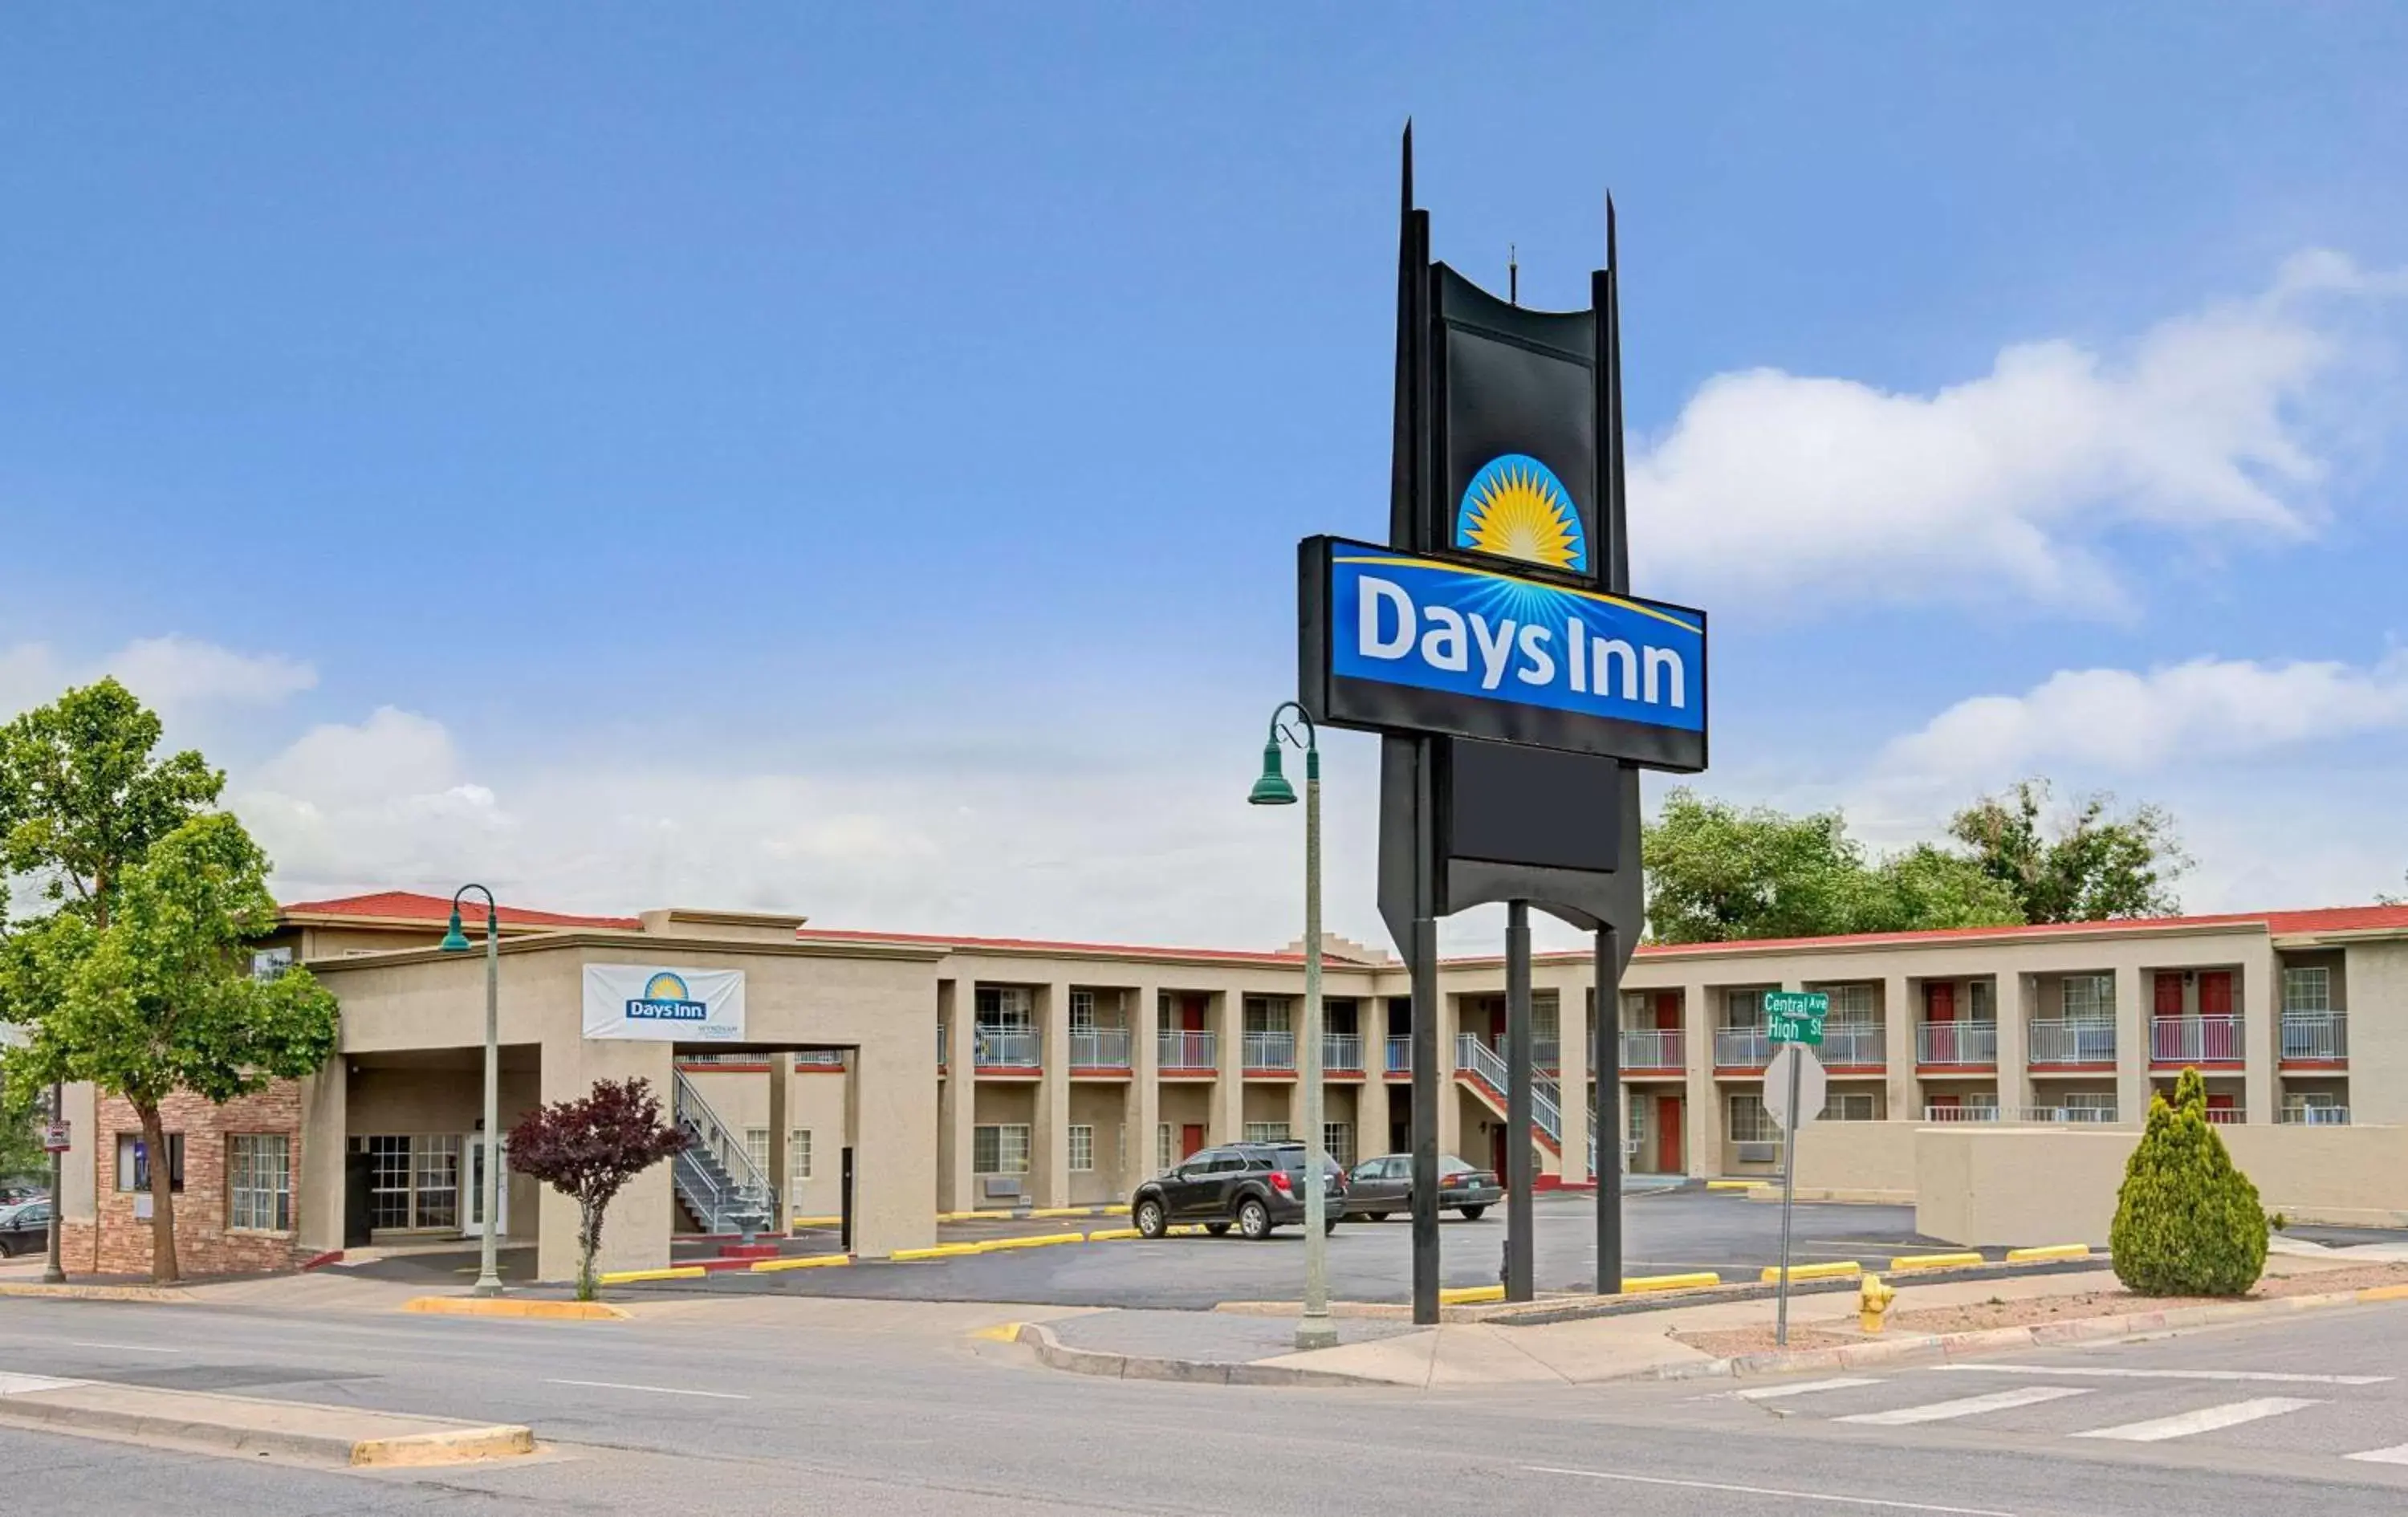 Property Building in Days Inn by Wyndham Albuquerque Downtown